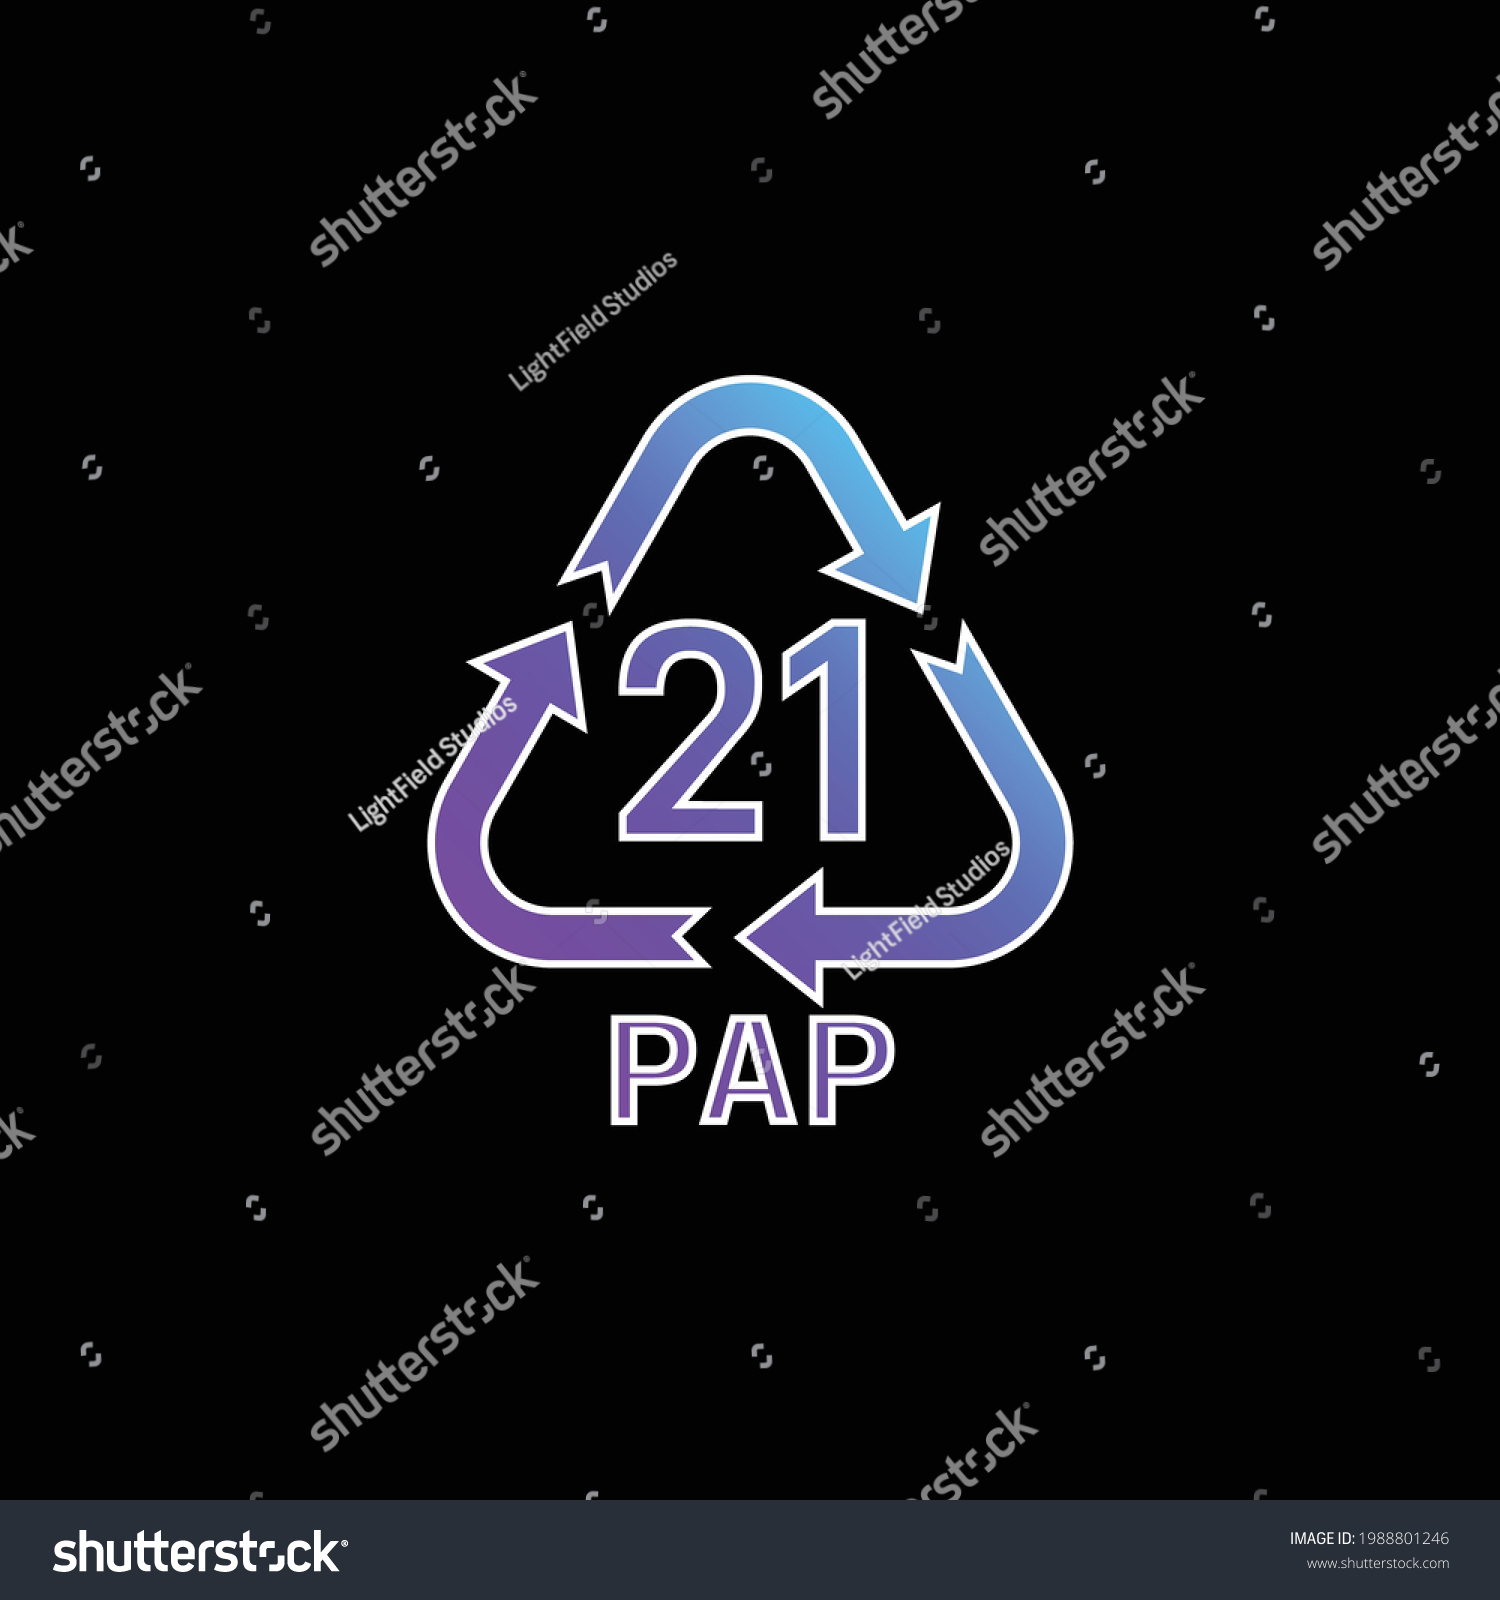 SVG of 21 PAP blue gradient vector icon svg